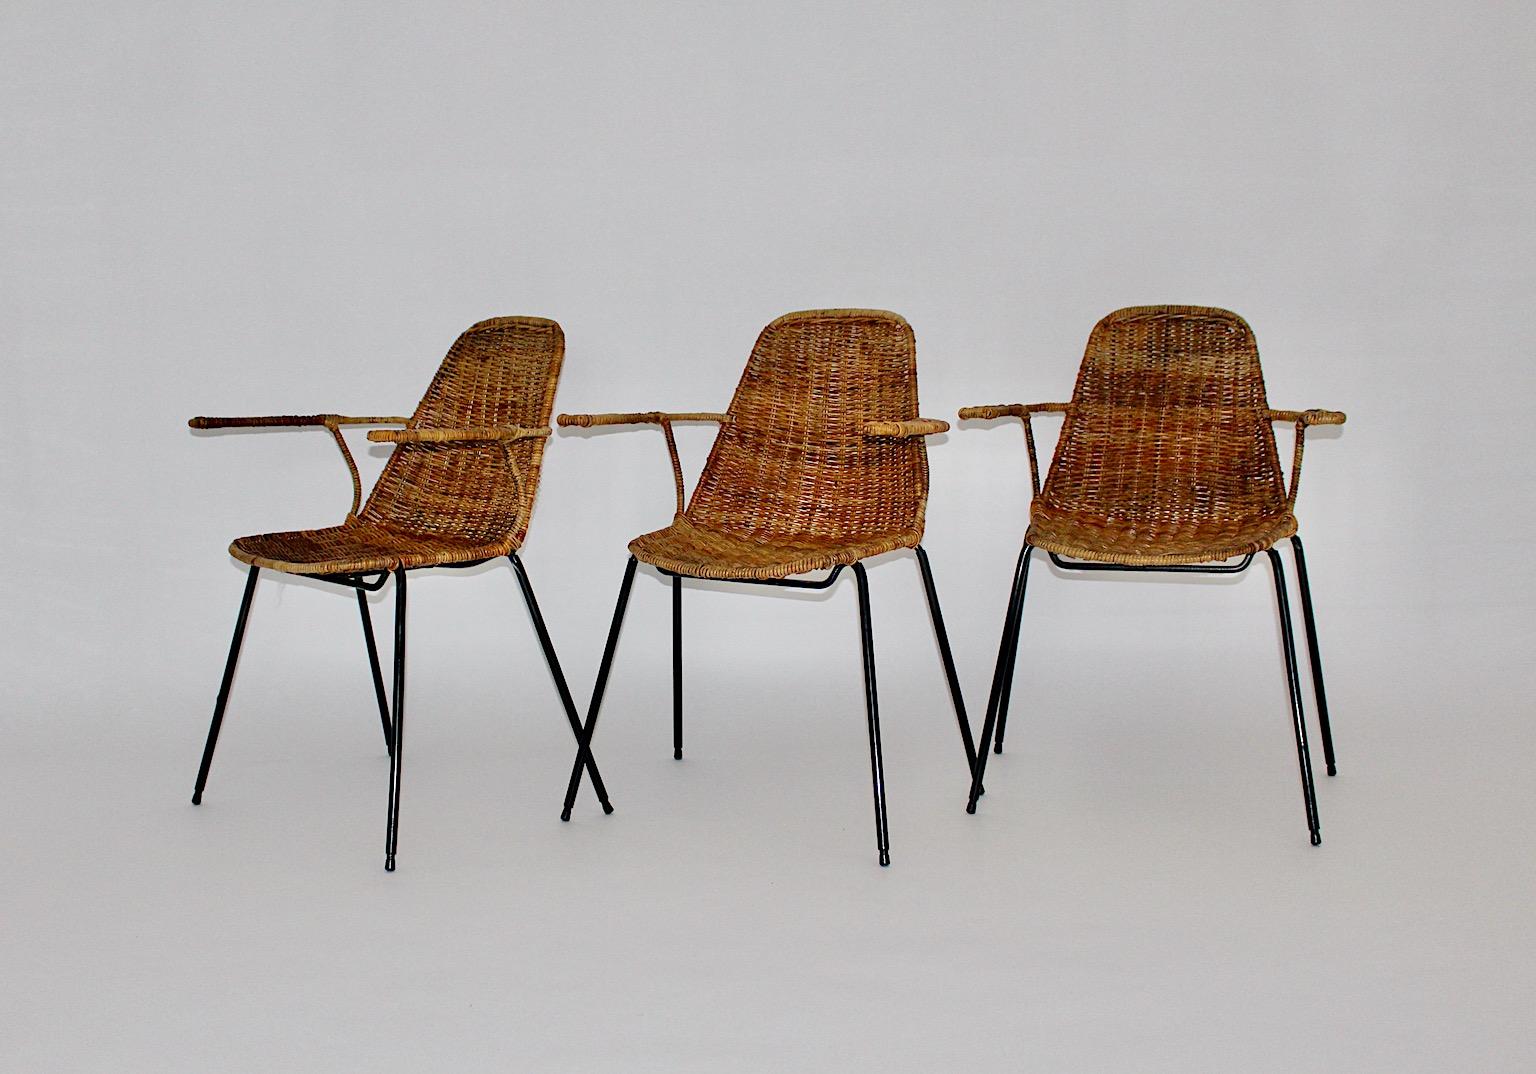 Mid Century Modern vintage authentic three dining chairs or chairs with armrests from rattan and metal by Gian Franco Legler 1950s Switzerland.
A fabulous and rare set of three chairs with armrests with a very comfortable seat shell from fine weaved